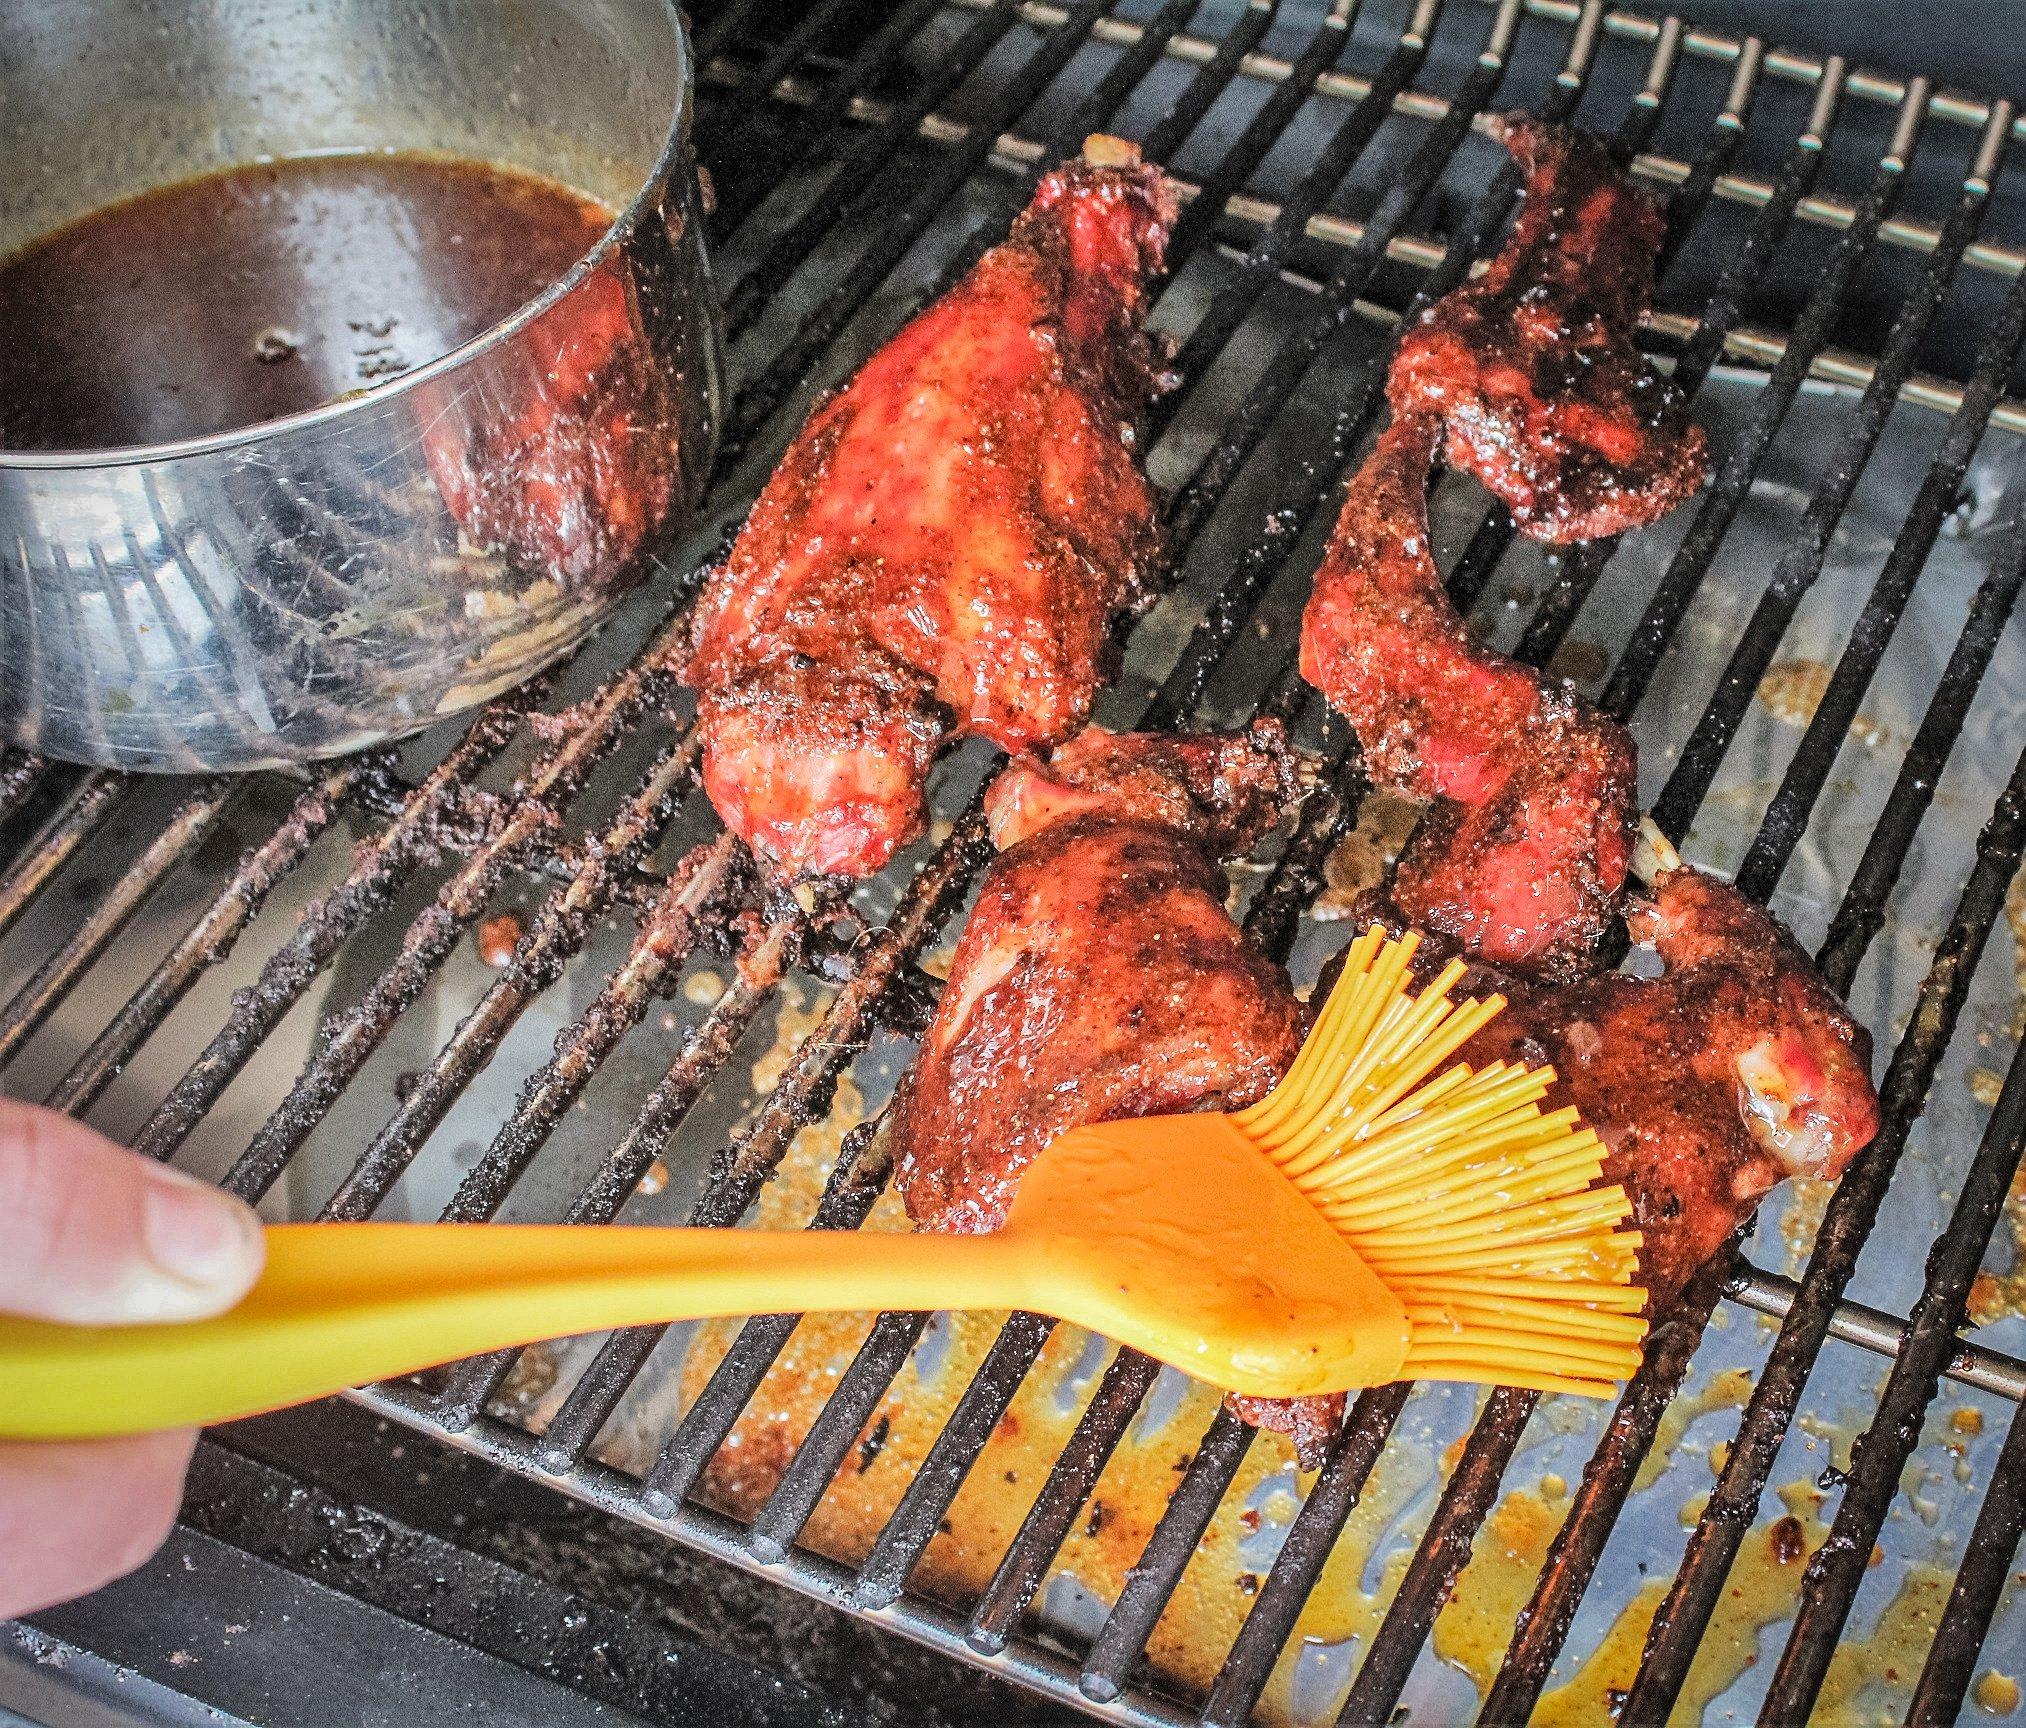 Brush the maple glaze over the raccoon as it grills.